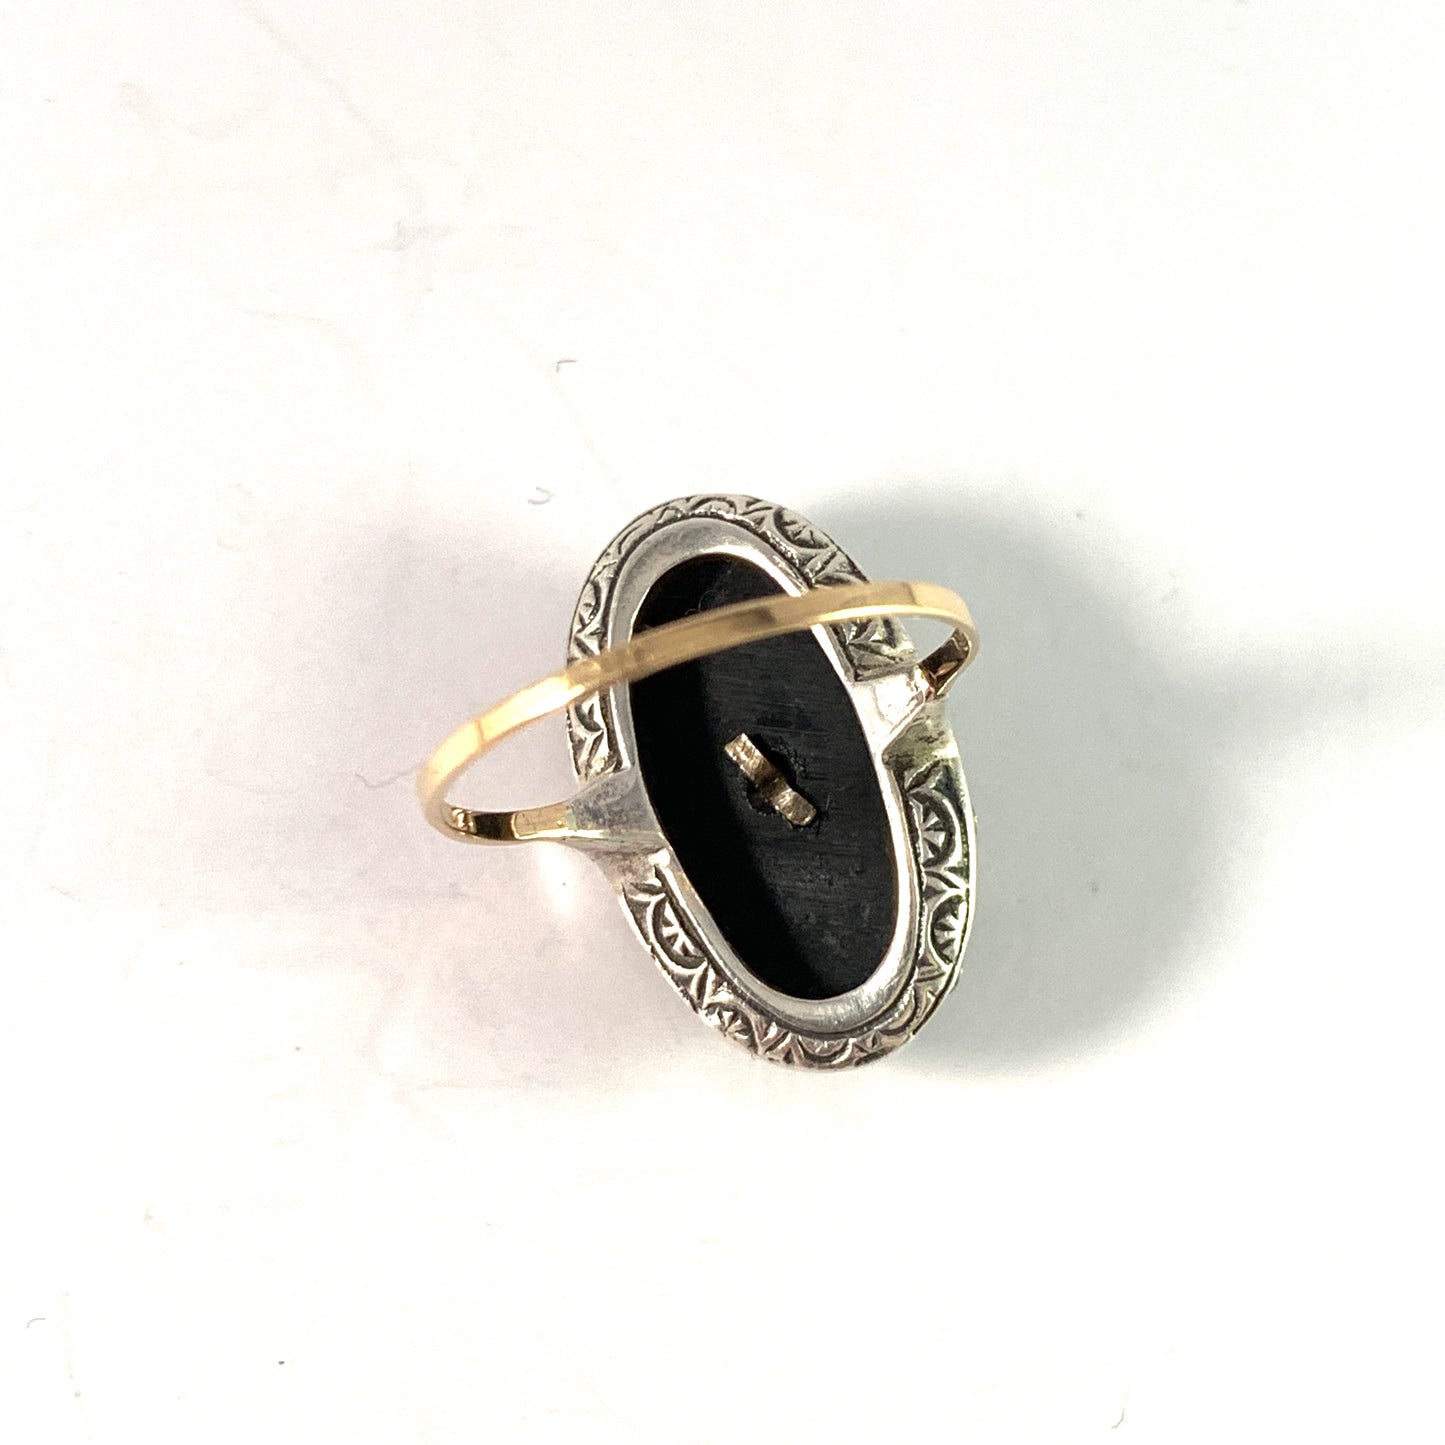 Sweden. Antique Early 1900s 18k Gold Silver Jet Marcasite Mourning Ring.